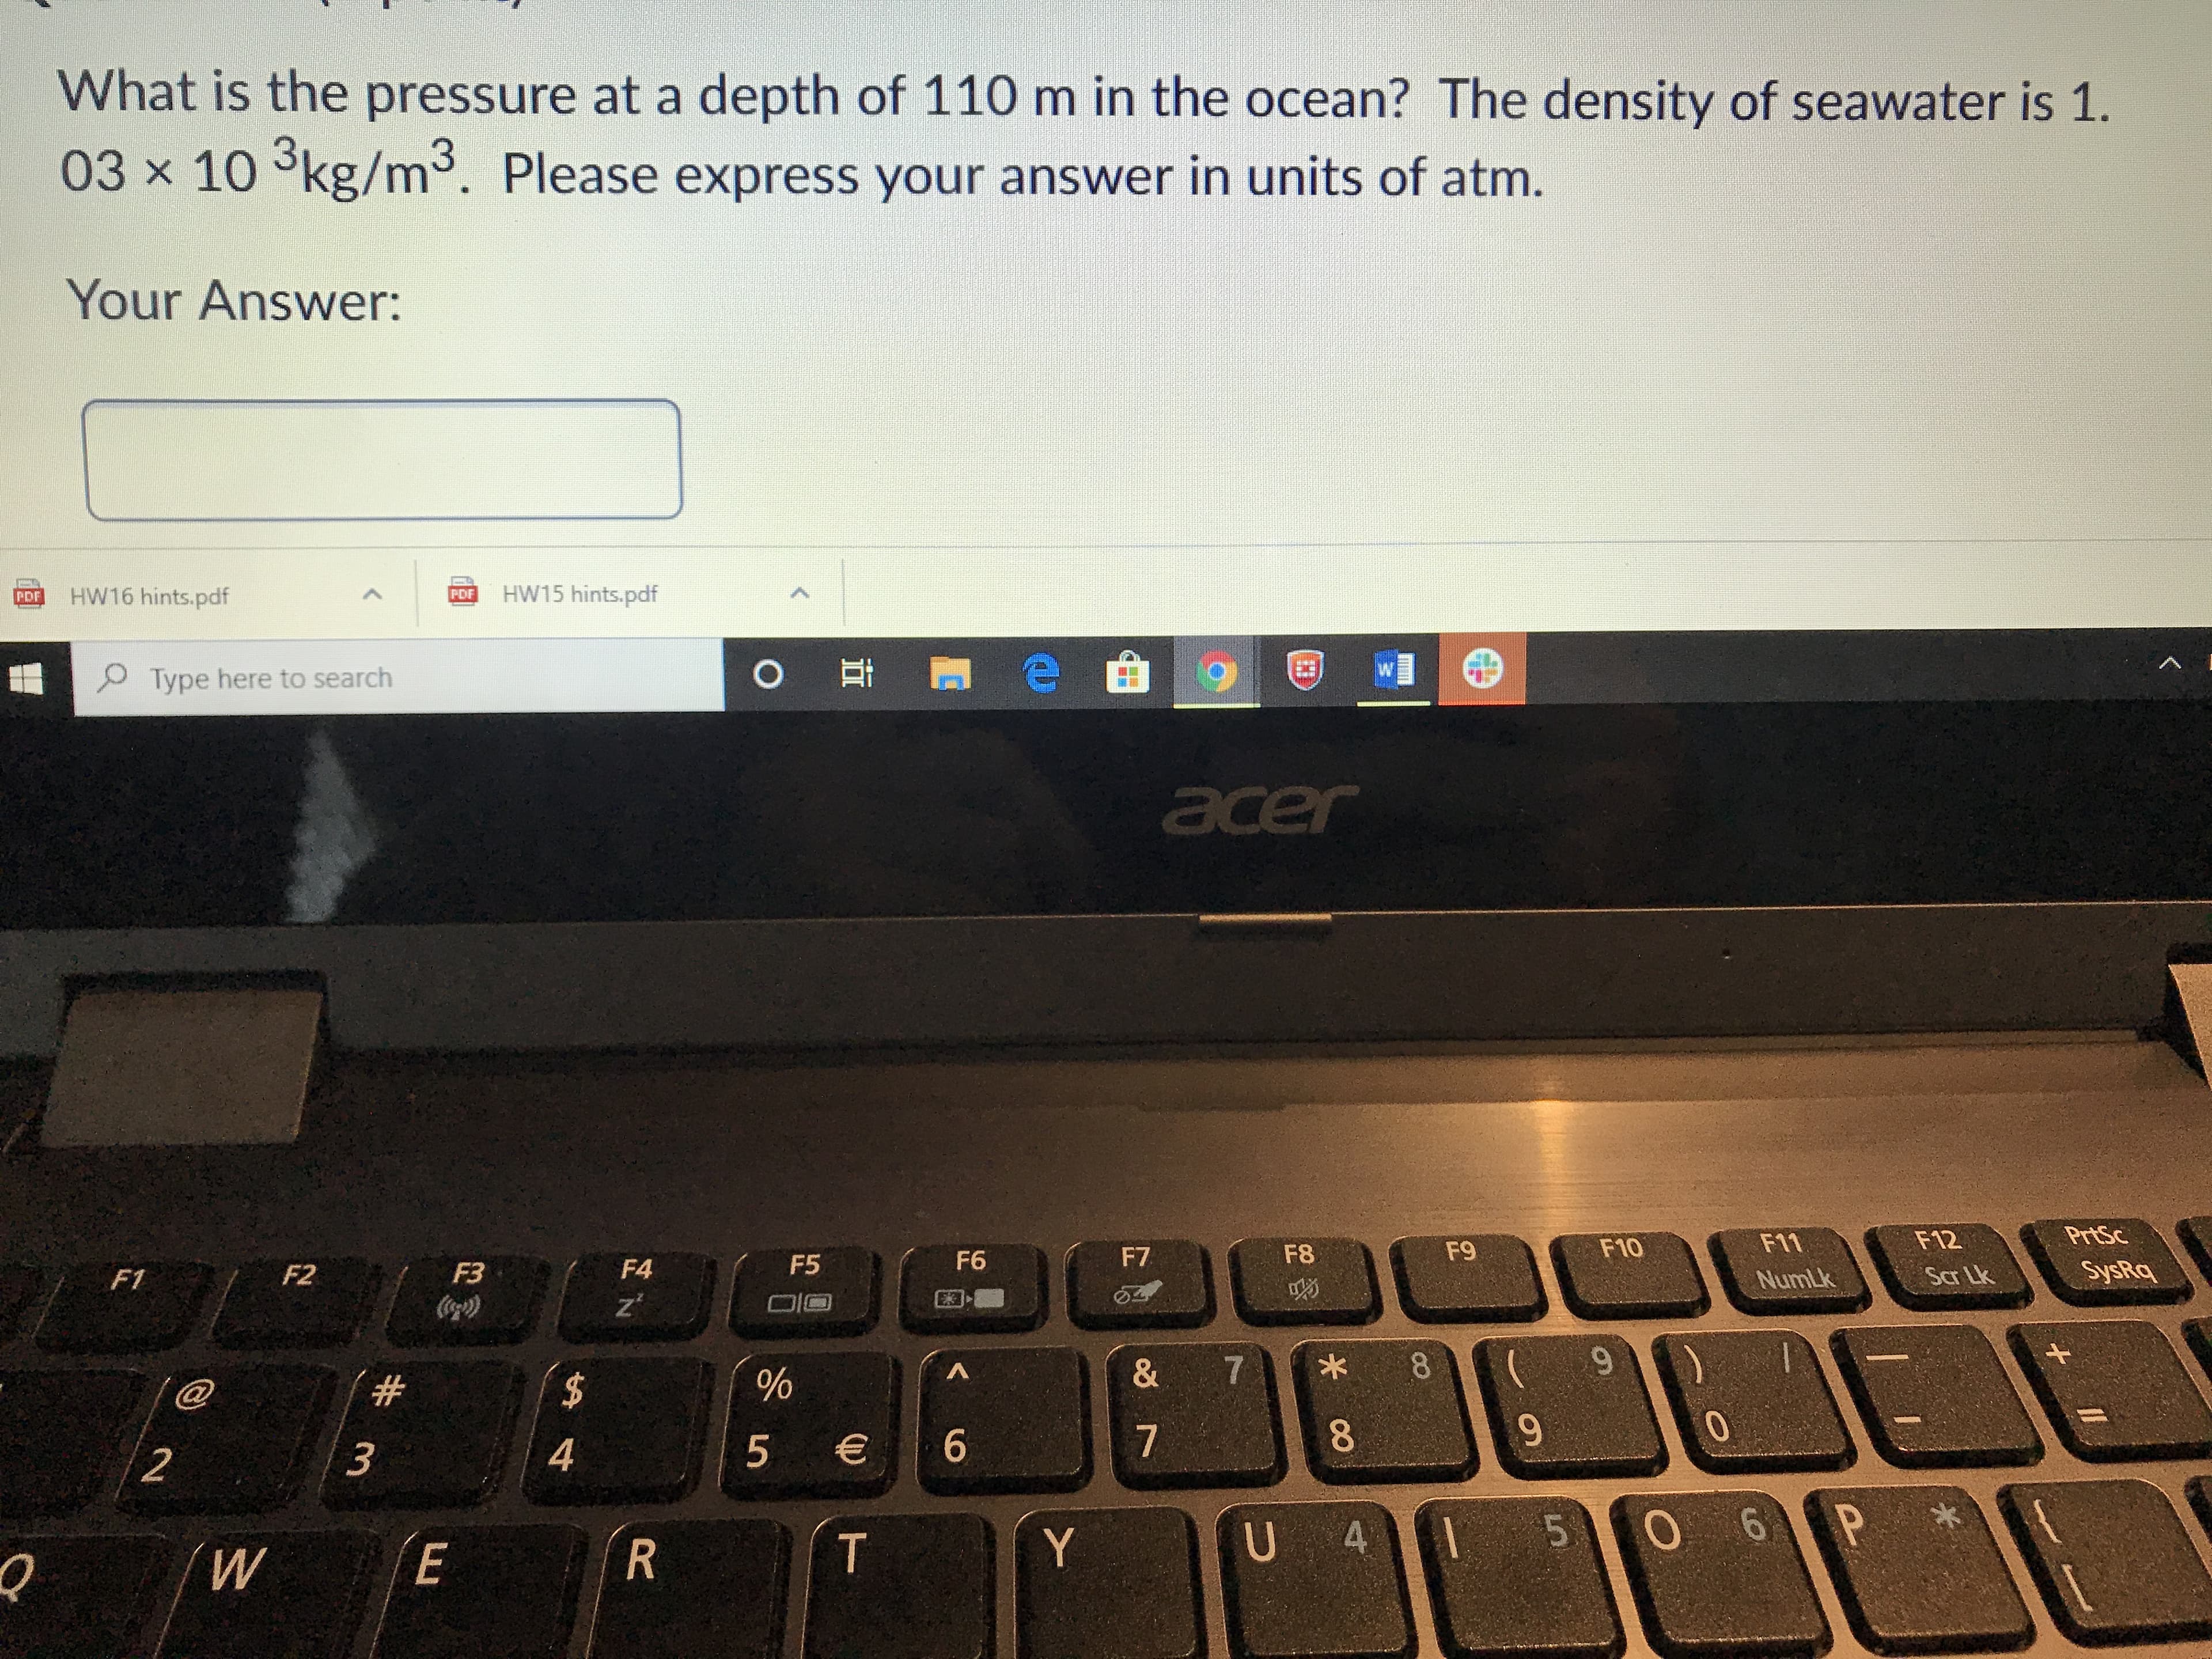 What is the pressure at a depth of 110 m in the ocean? The density of seawater is 1.
03 x 10 kg/m. Please express your answer in units of atm.
